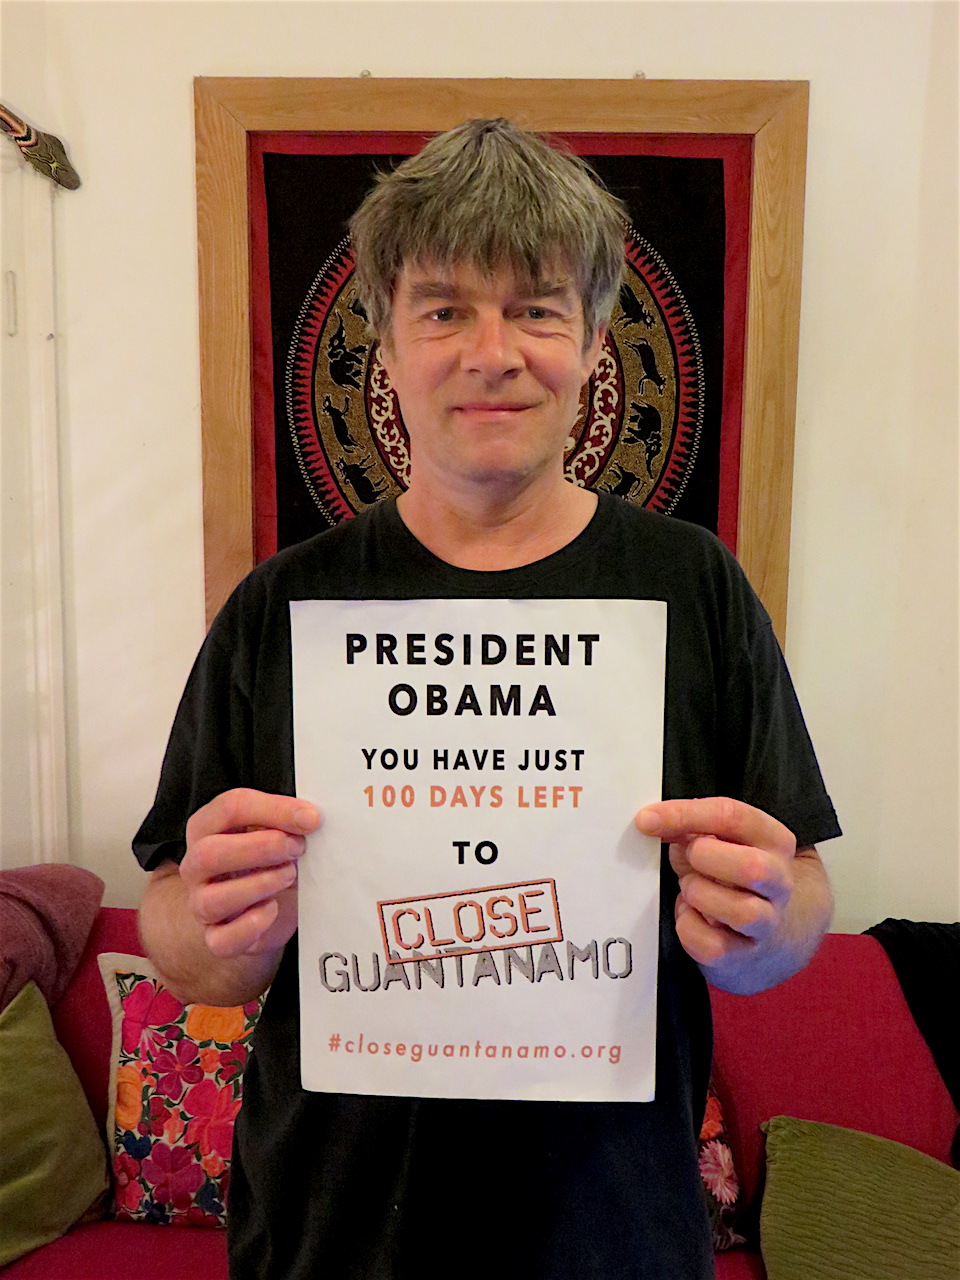 Andy Worthington supporting the Countdown to Close Guantanamo on October 11, 2016, when President Obama had just 100 days left to close Guantanamo before he leaves office.